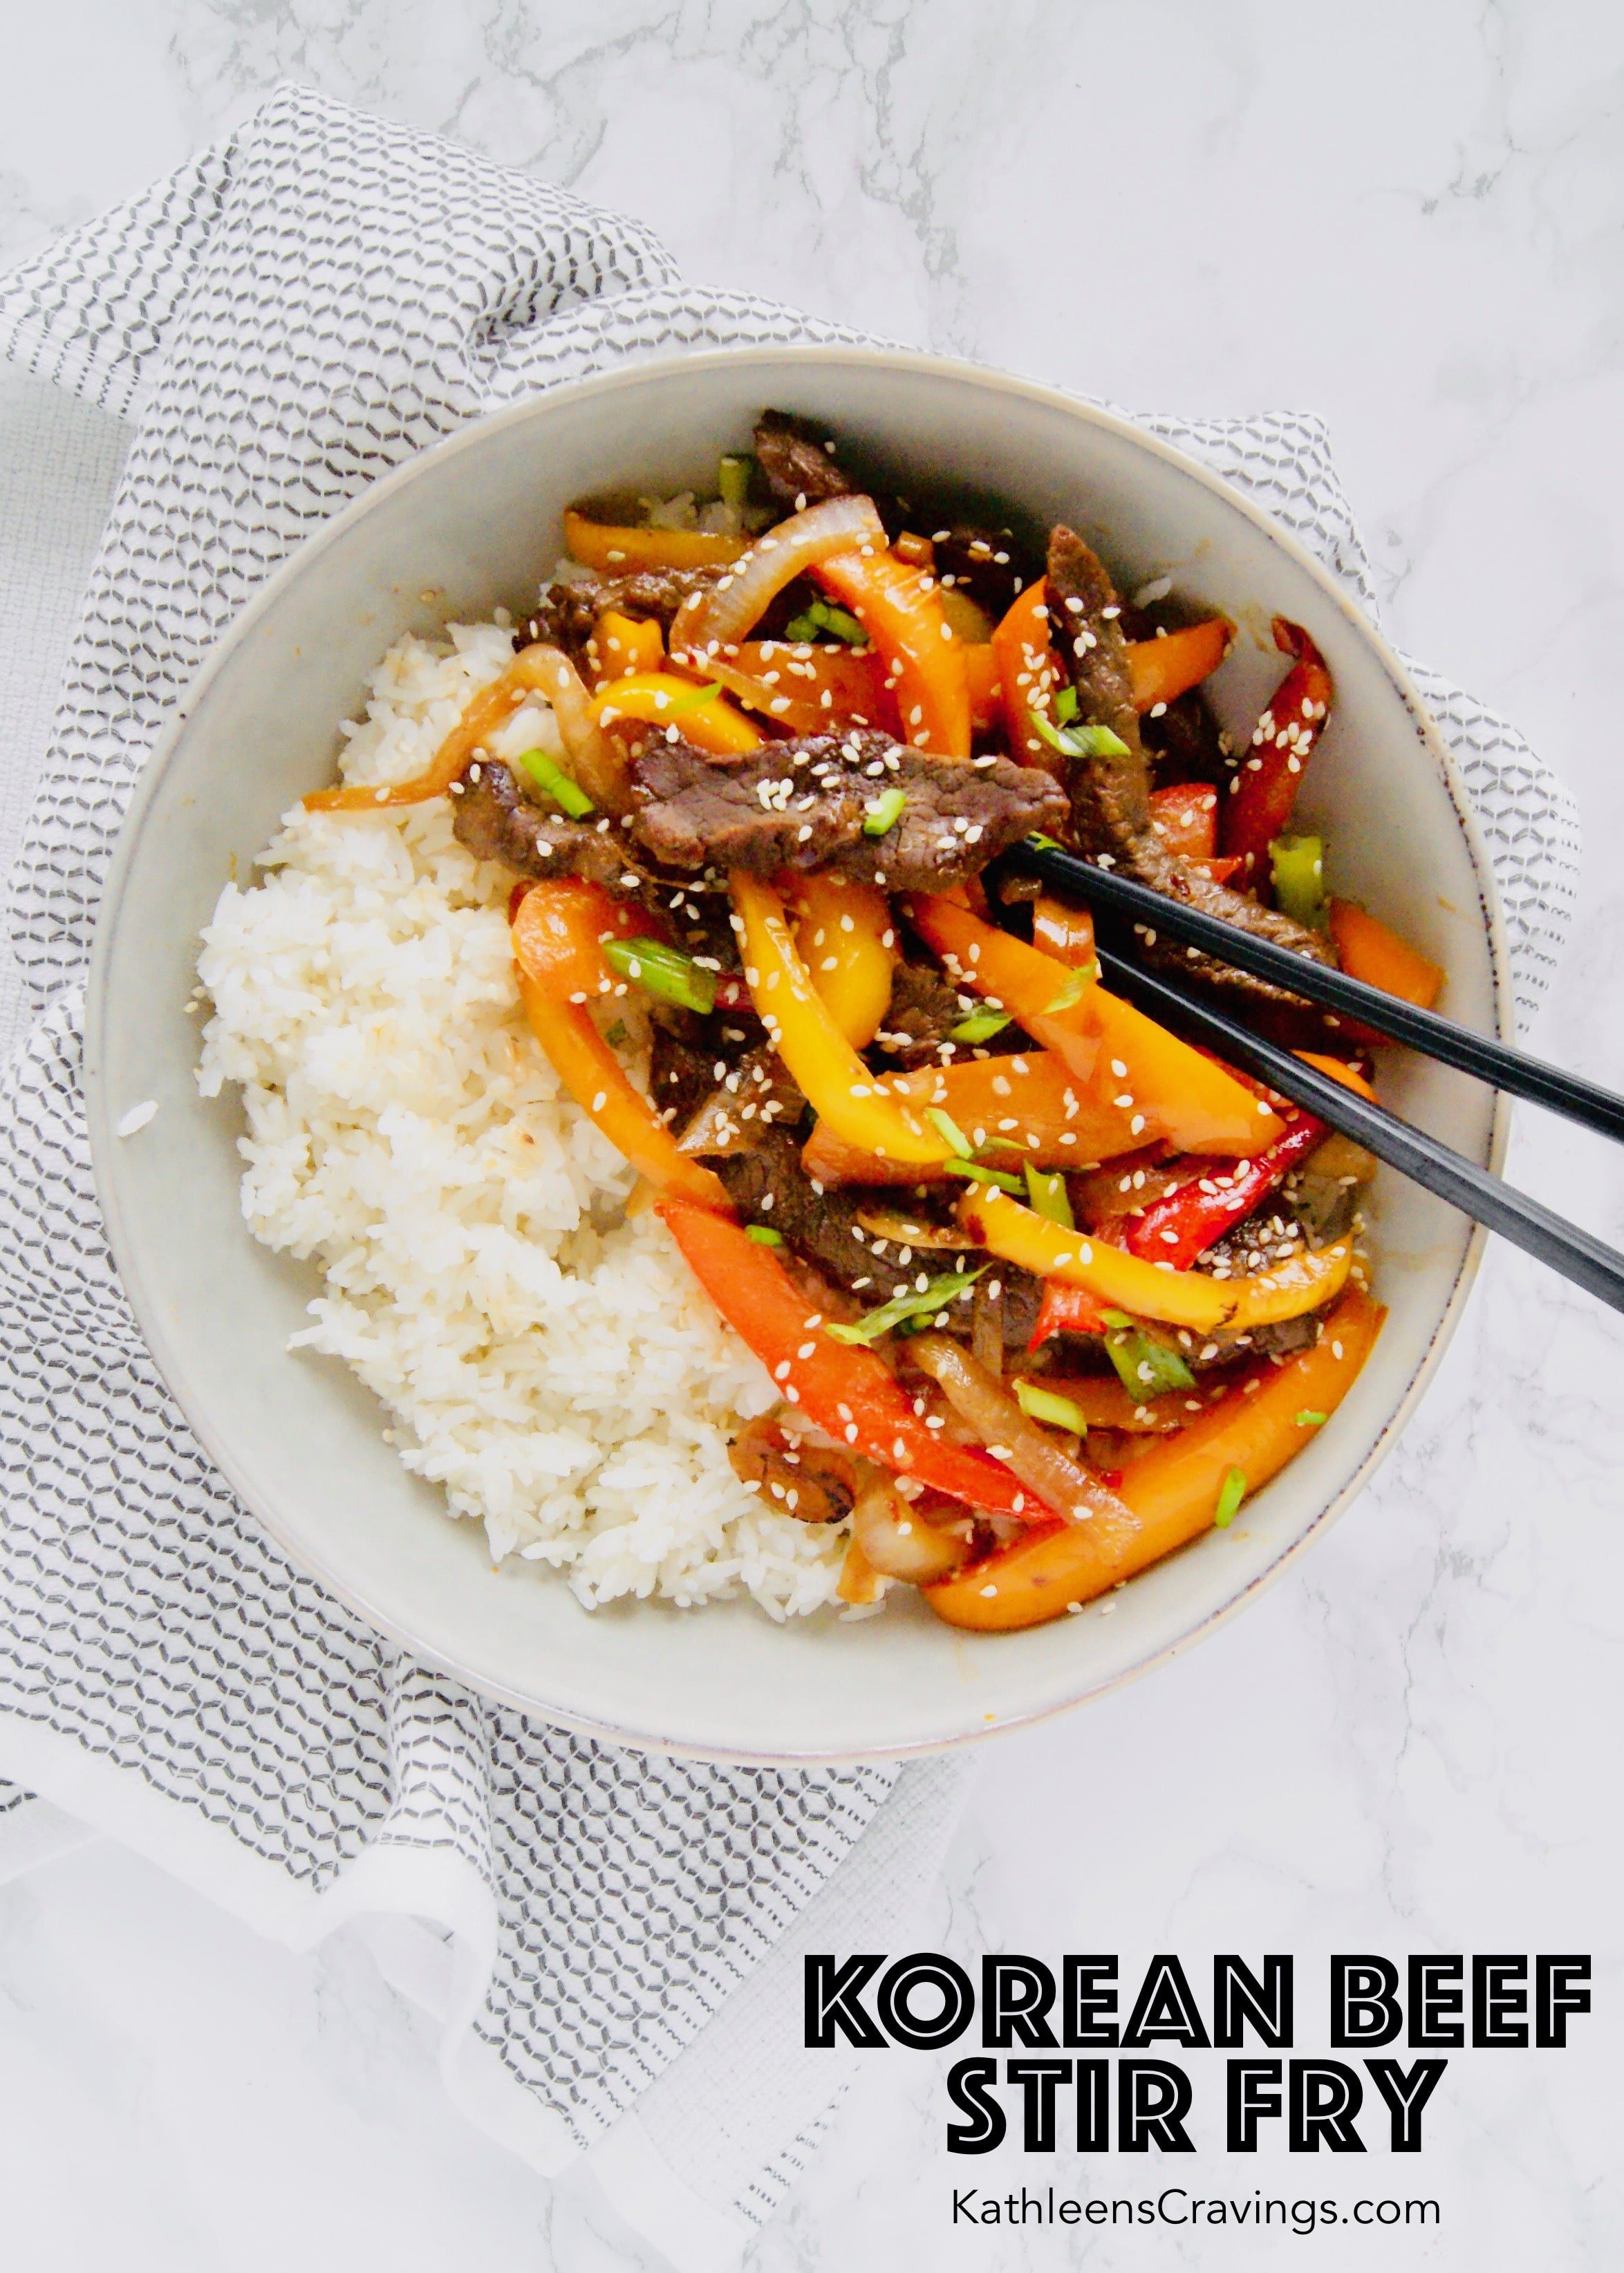 Korean stir fried beef, peppers and onions with white rice